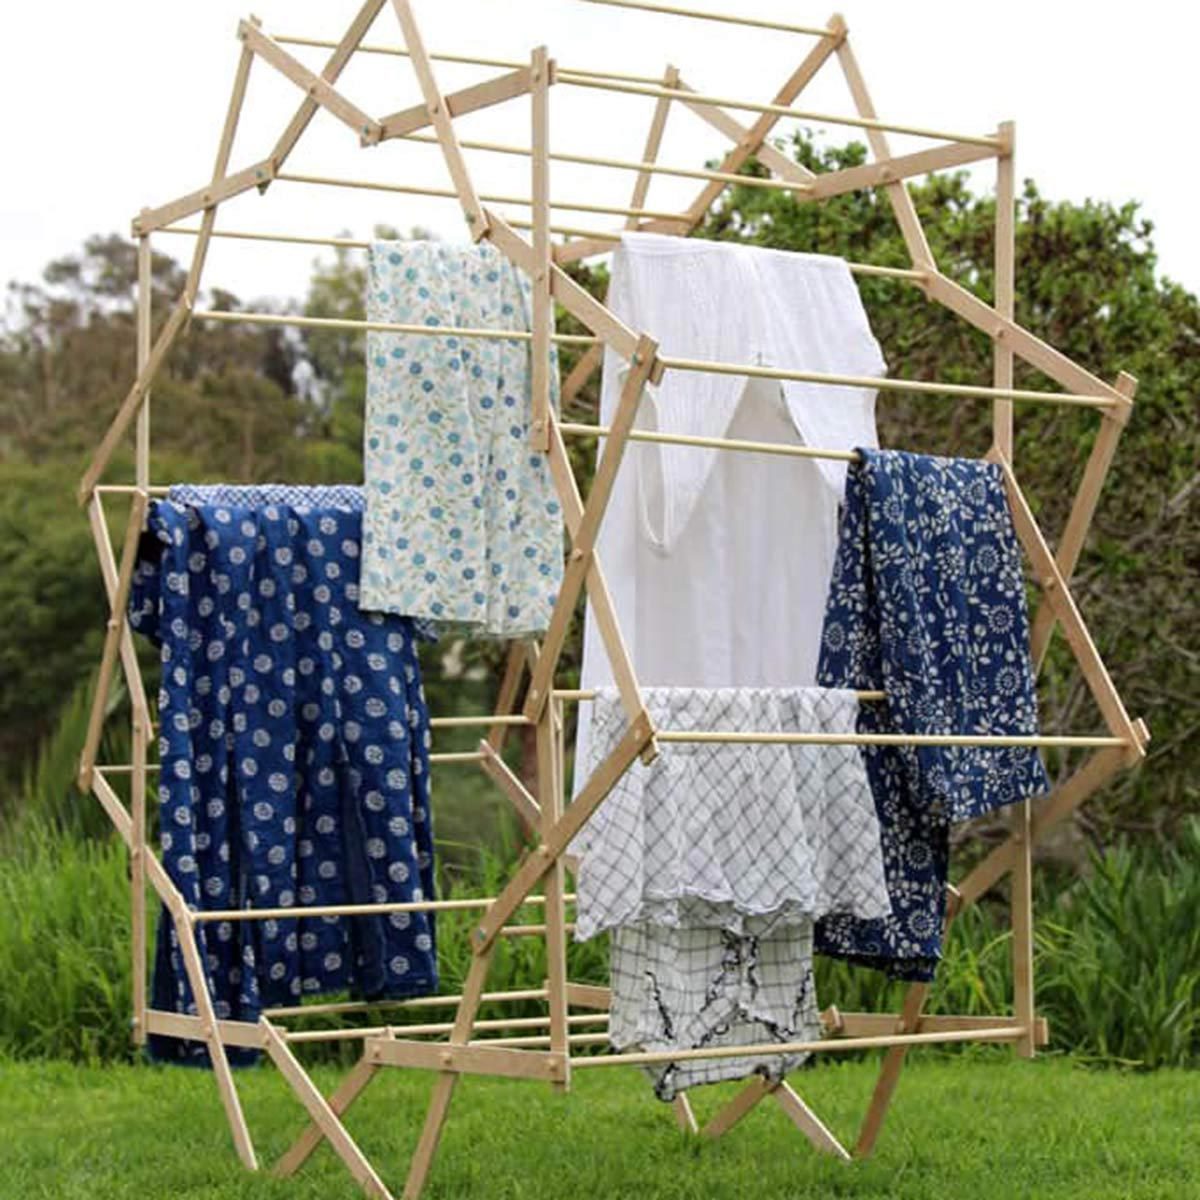 https://www.familyhandyman.com/wp-content/uploads/2018/05/star-shaped-clothes-drying-rackl.jpg?fit=696%2C696